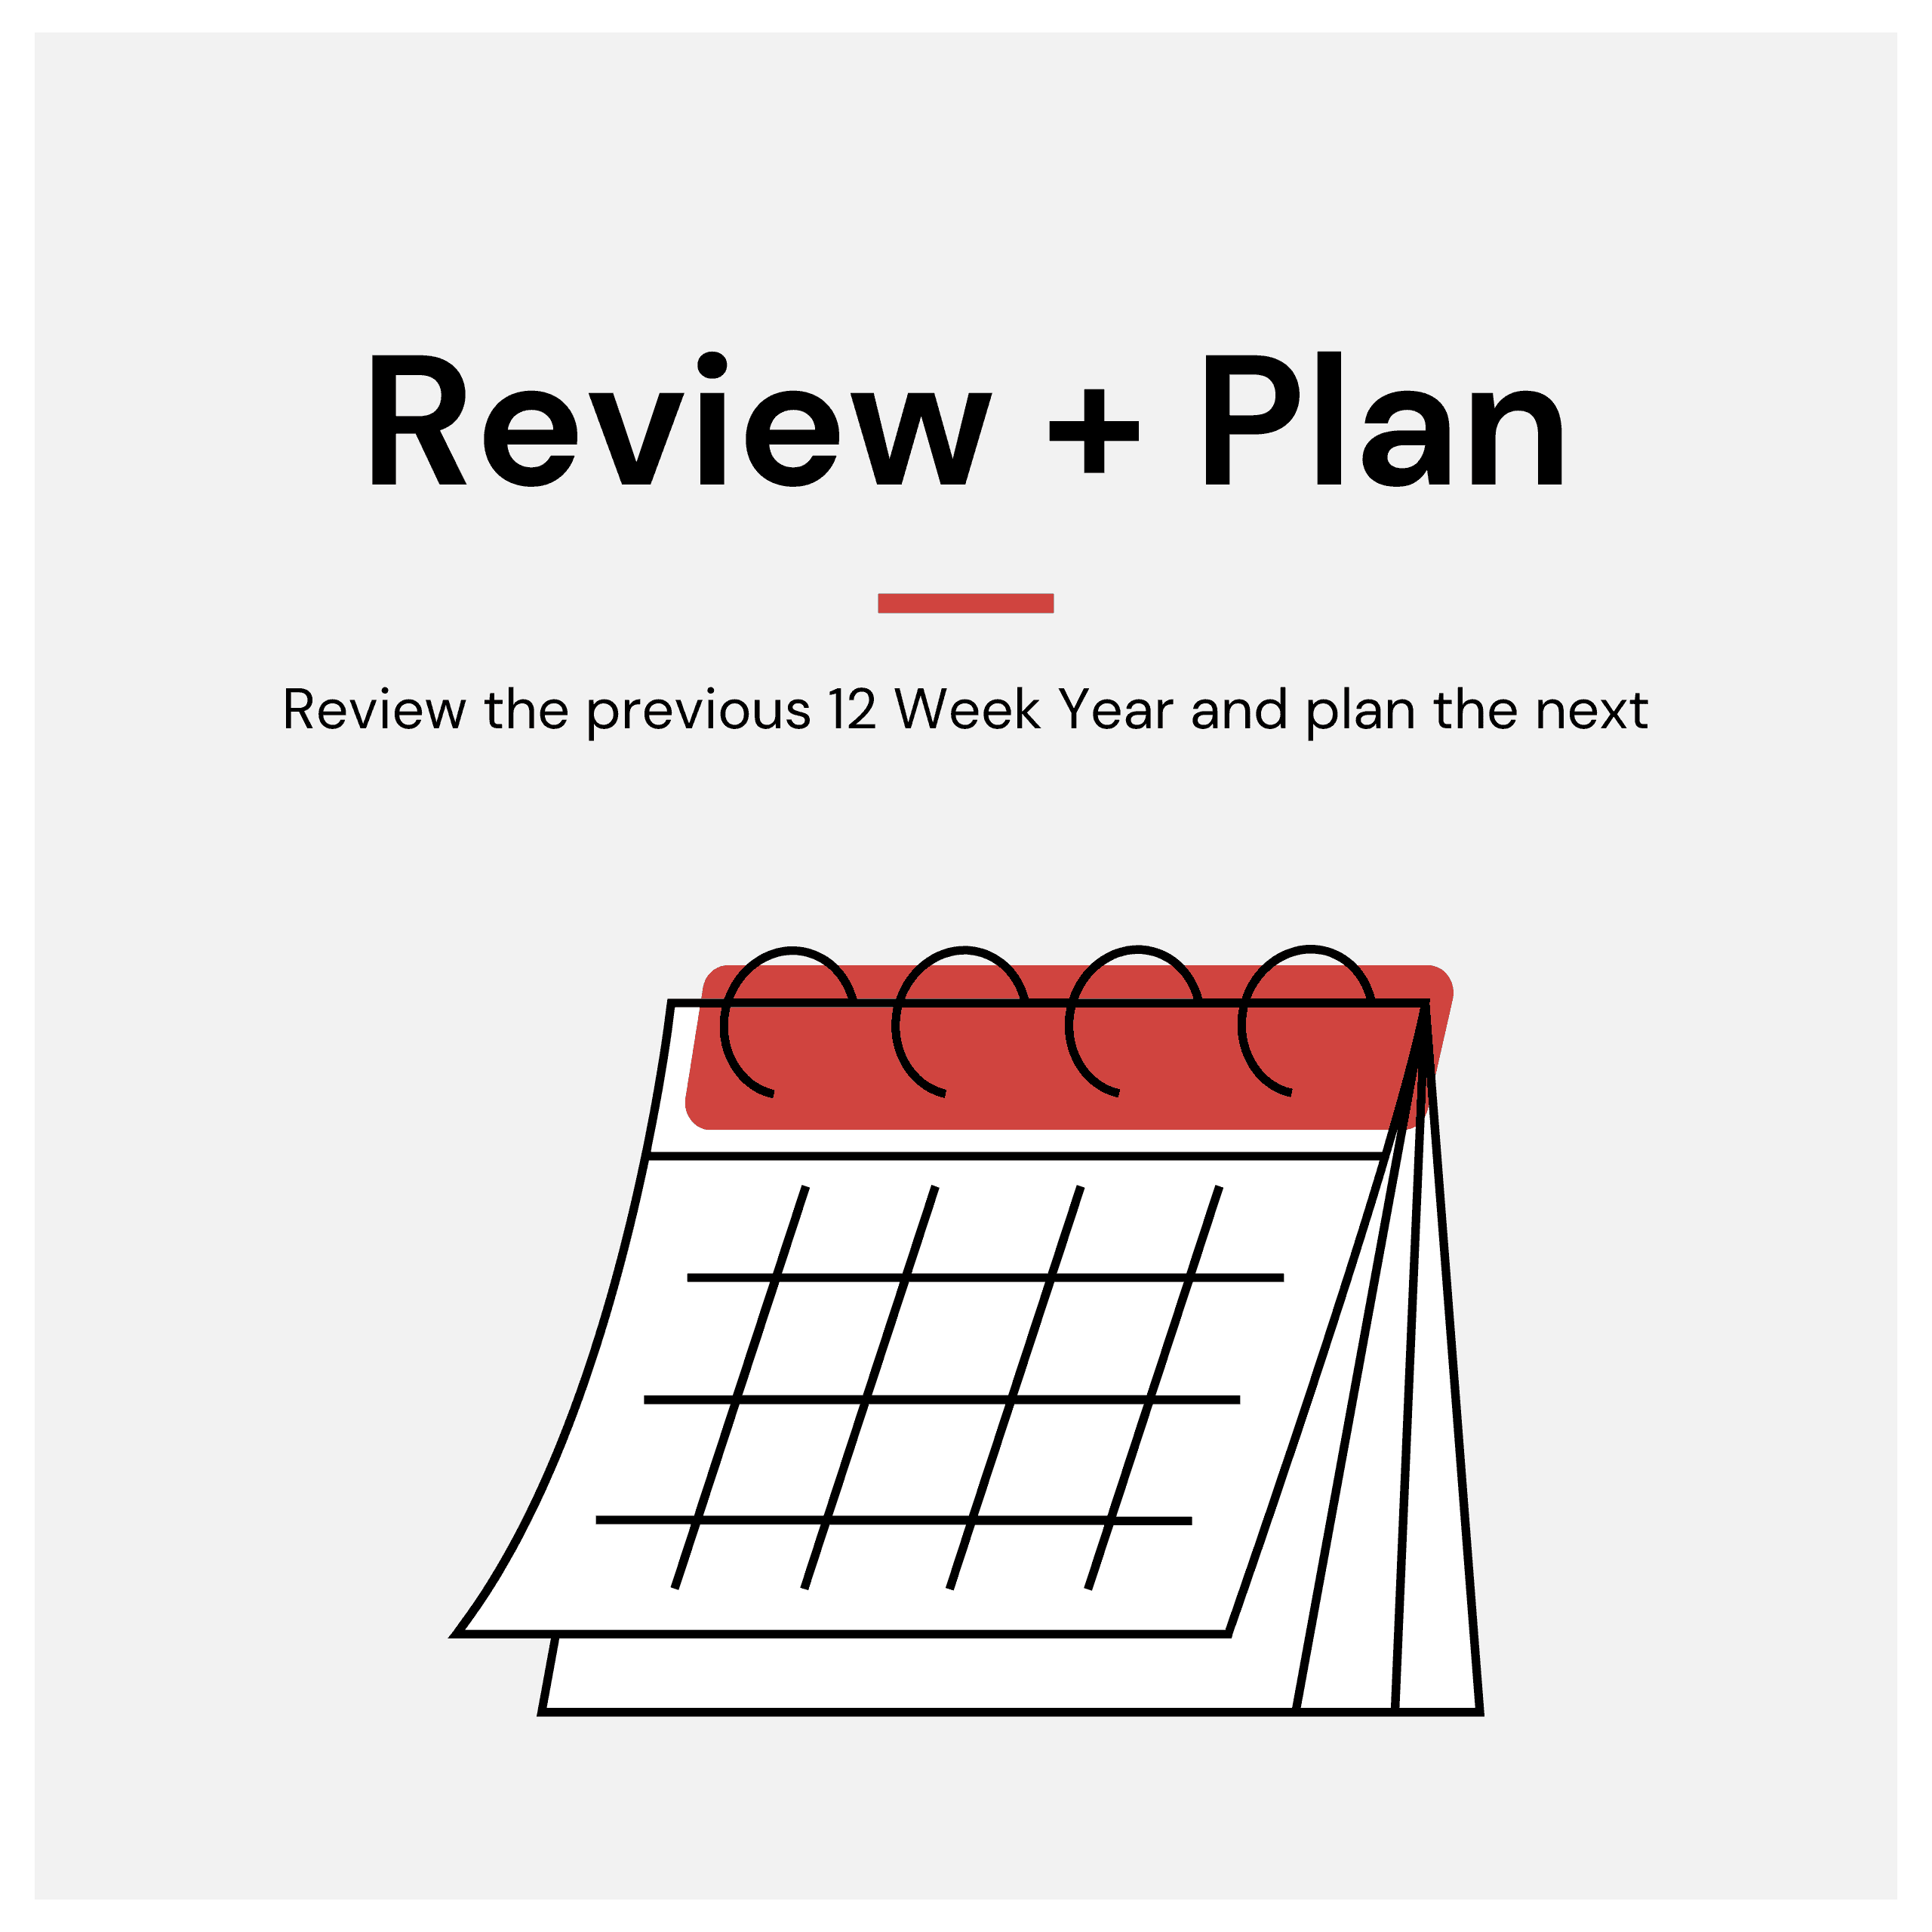 Review your previous 12 Week year and plan the next